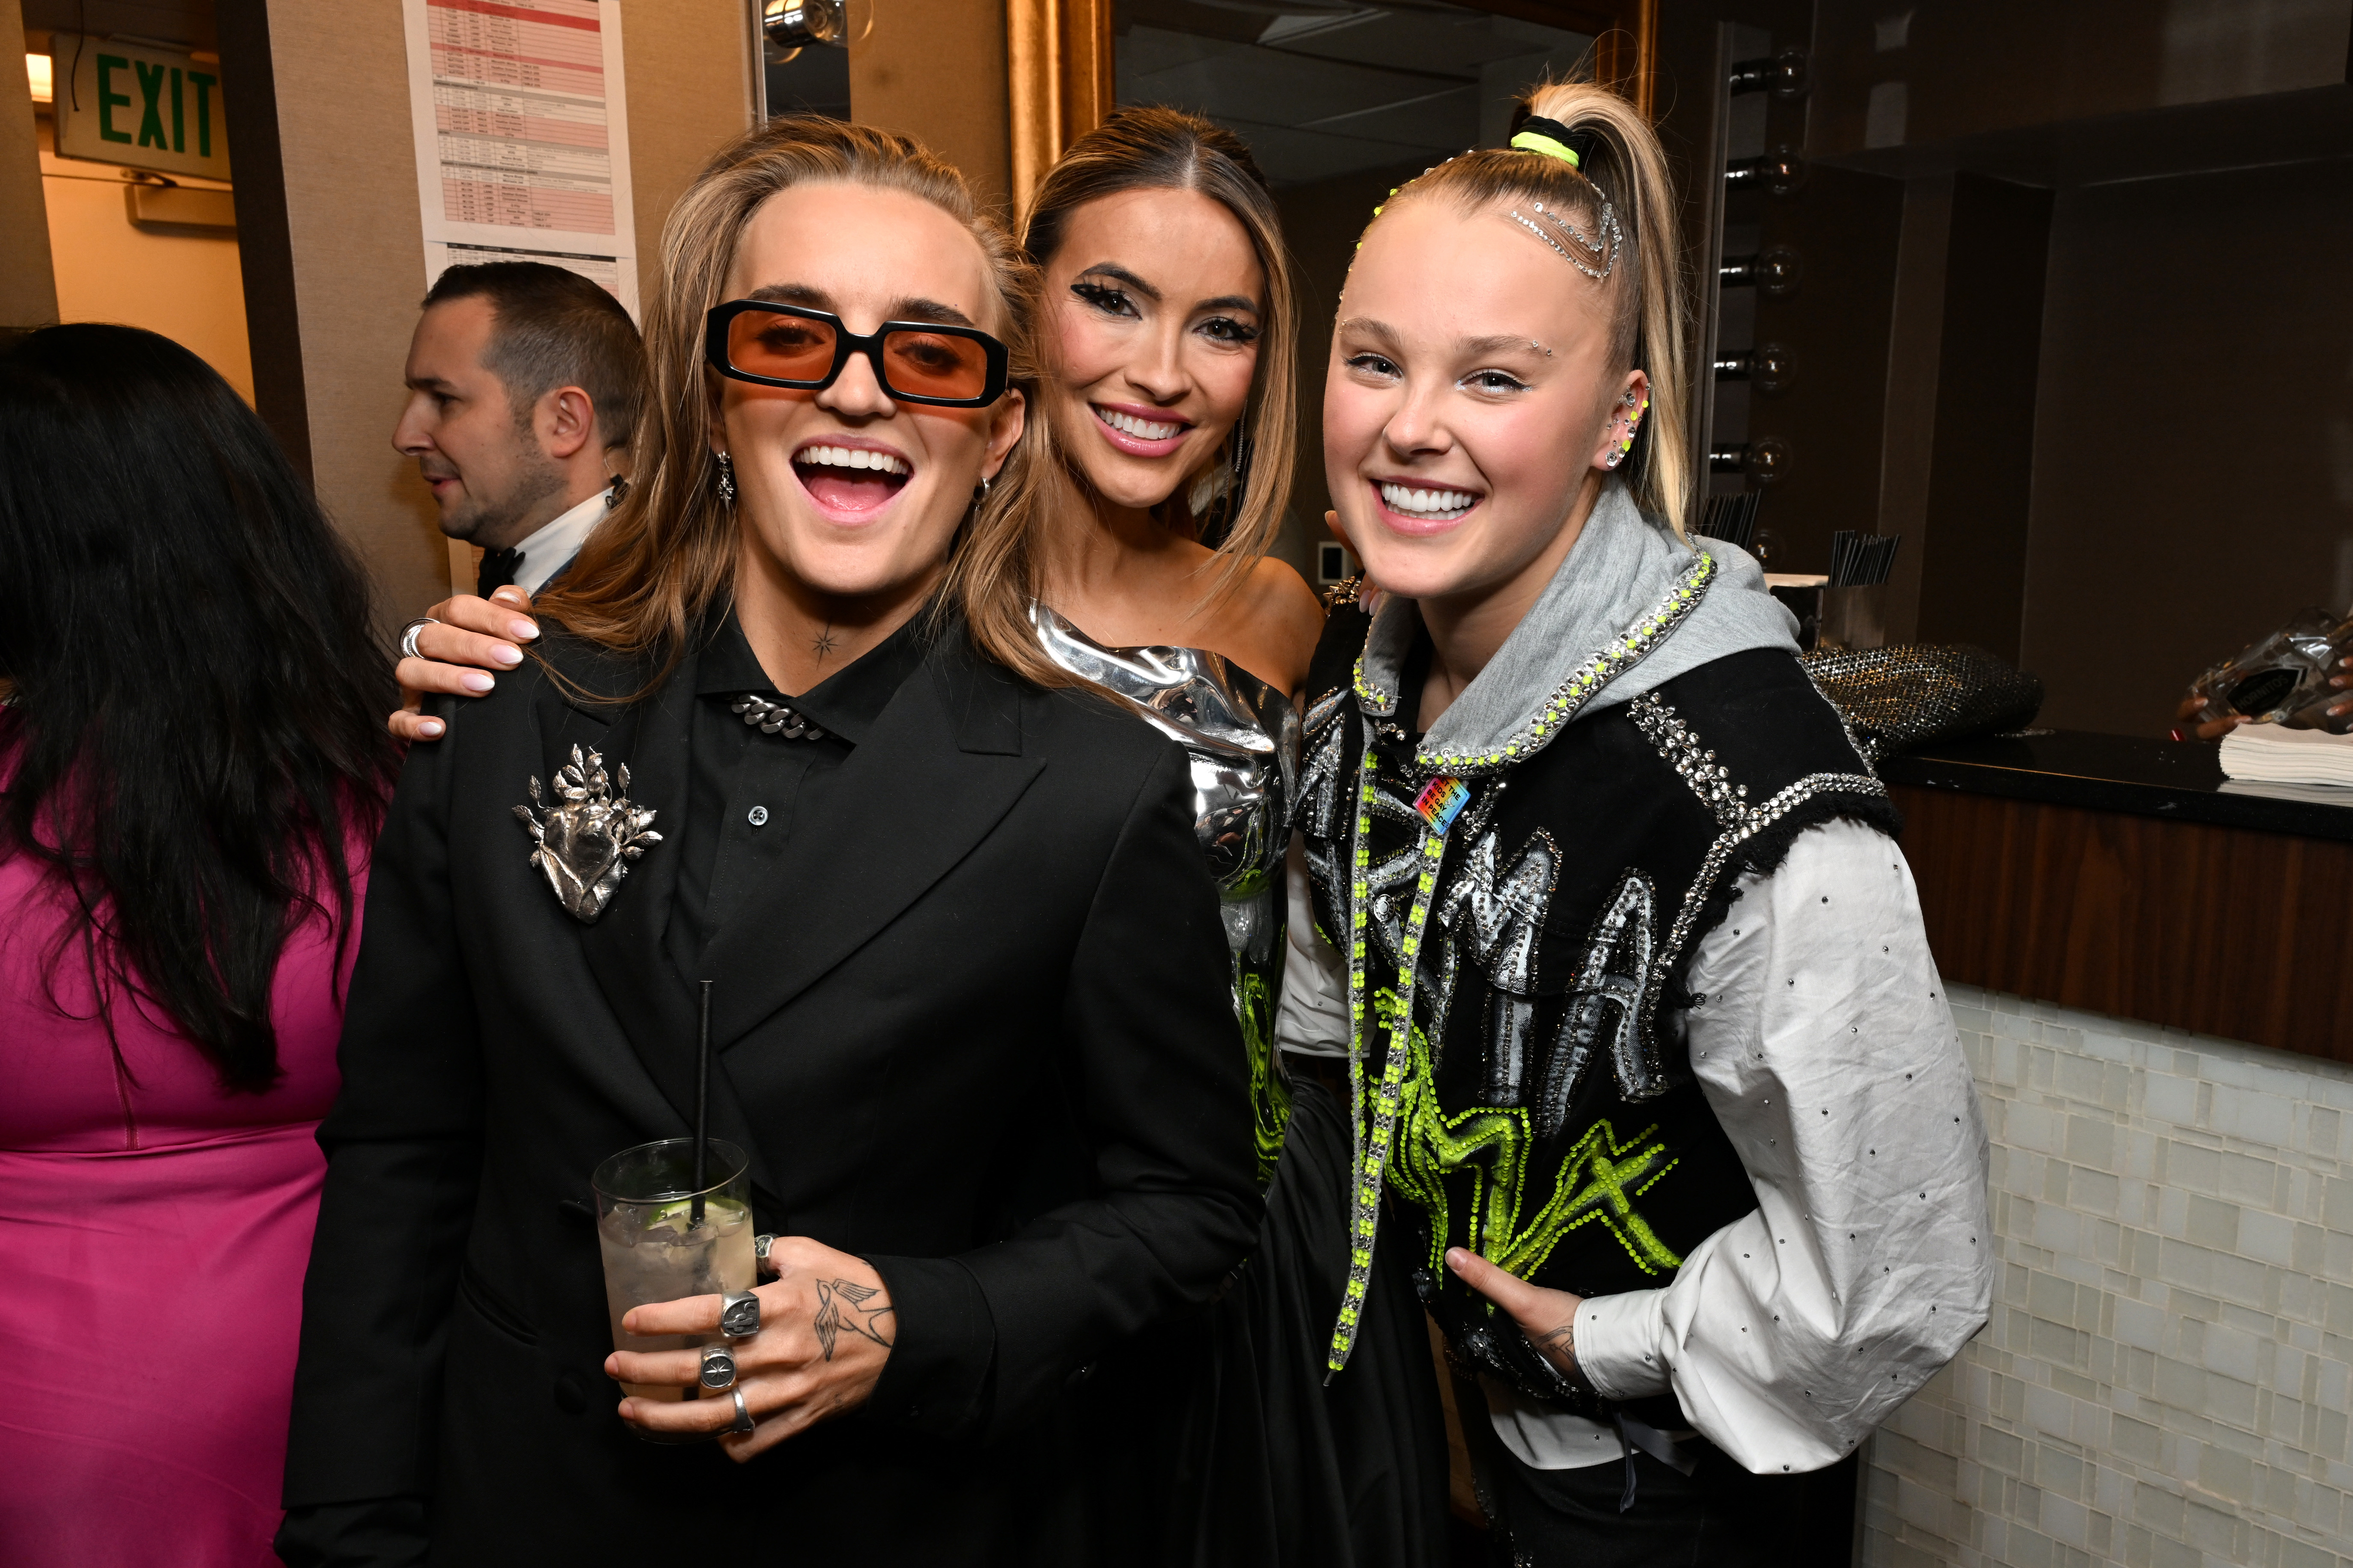 Three smiling individuals pose together at an event, two in embellished black jackets and one in a metallic dress